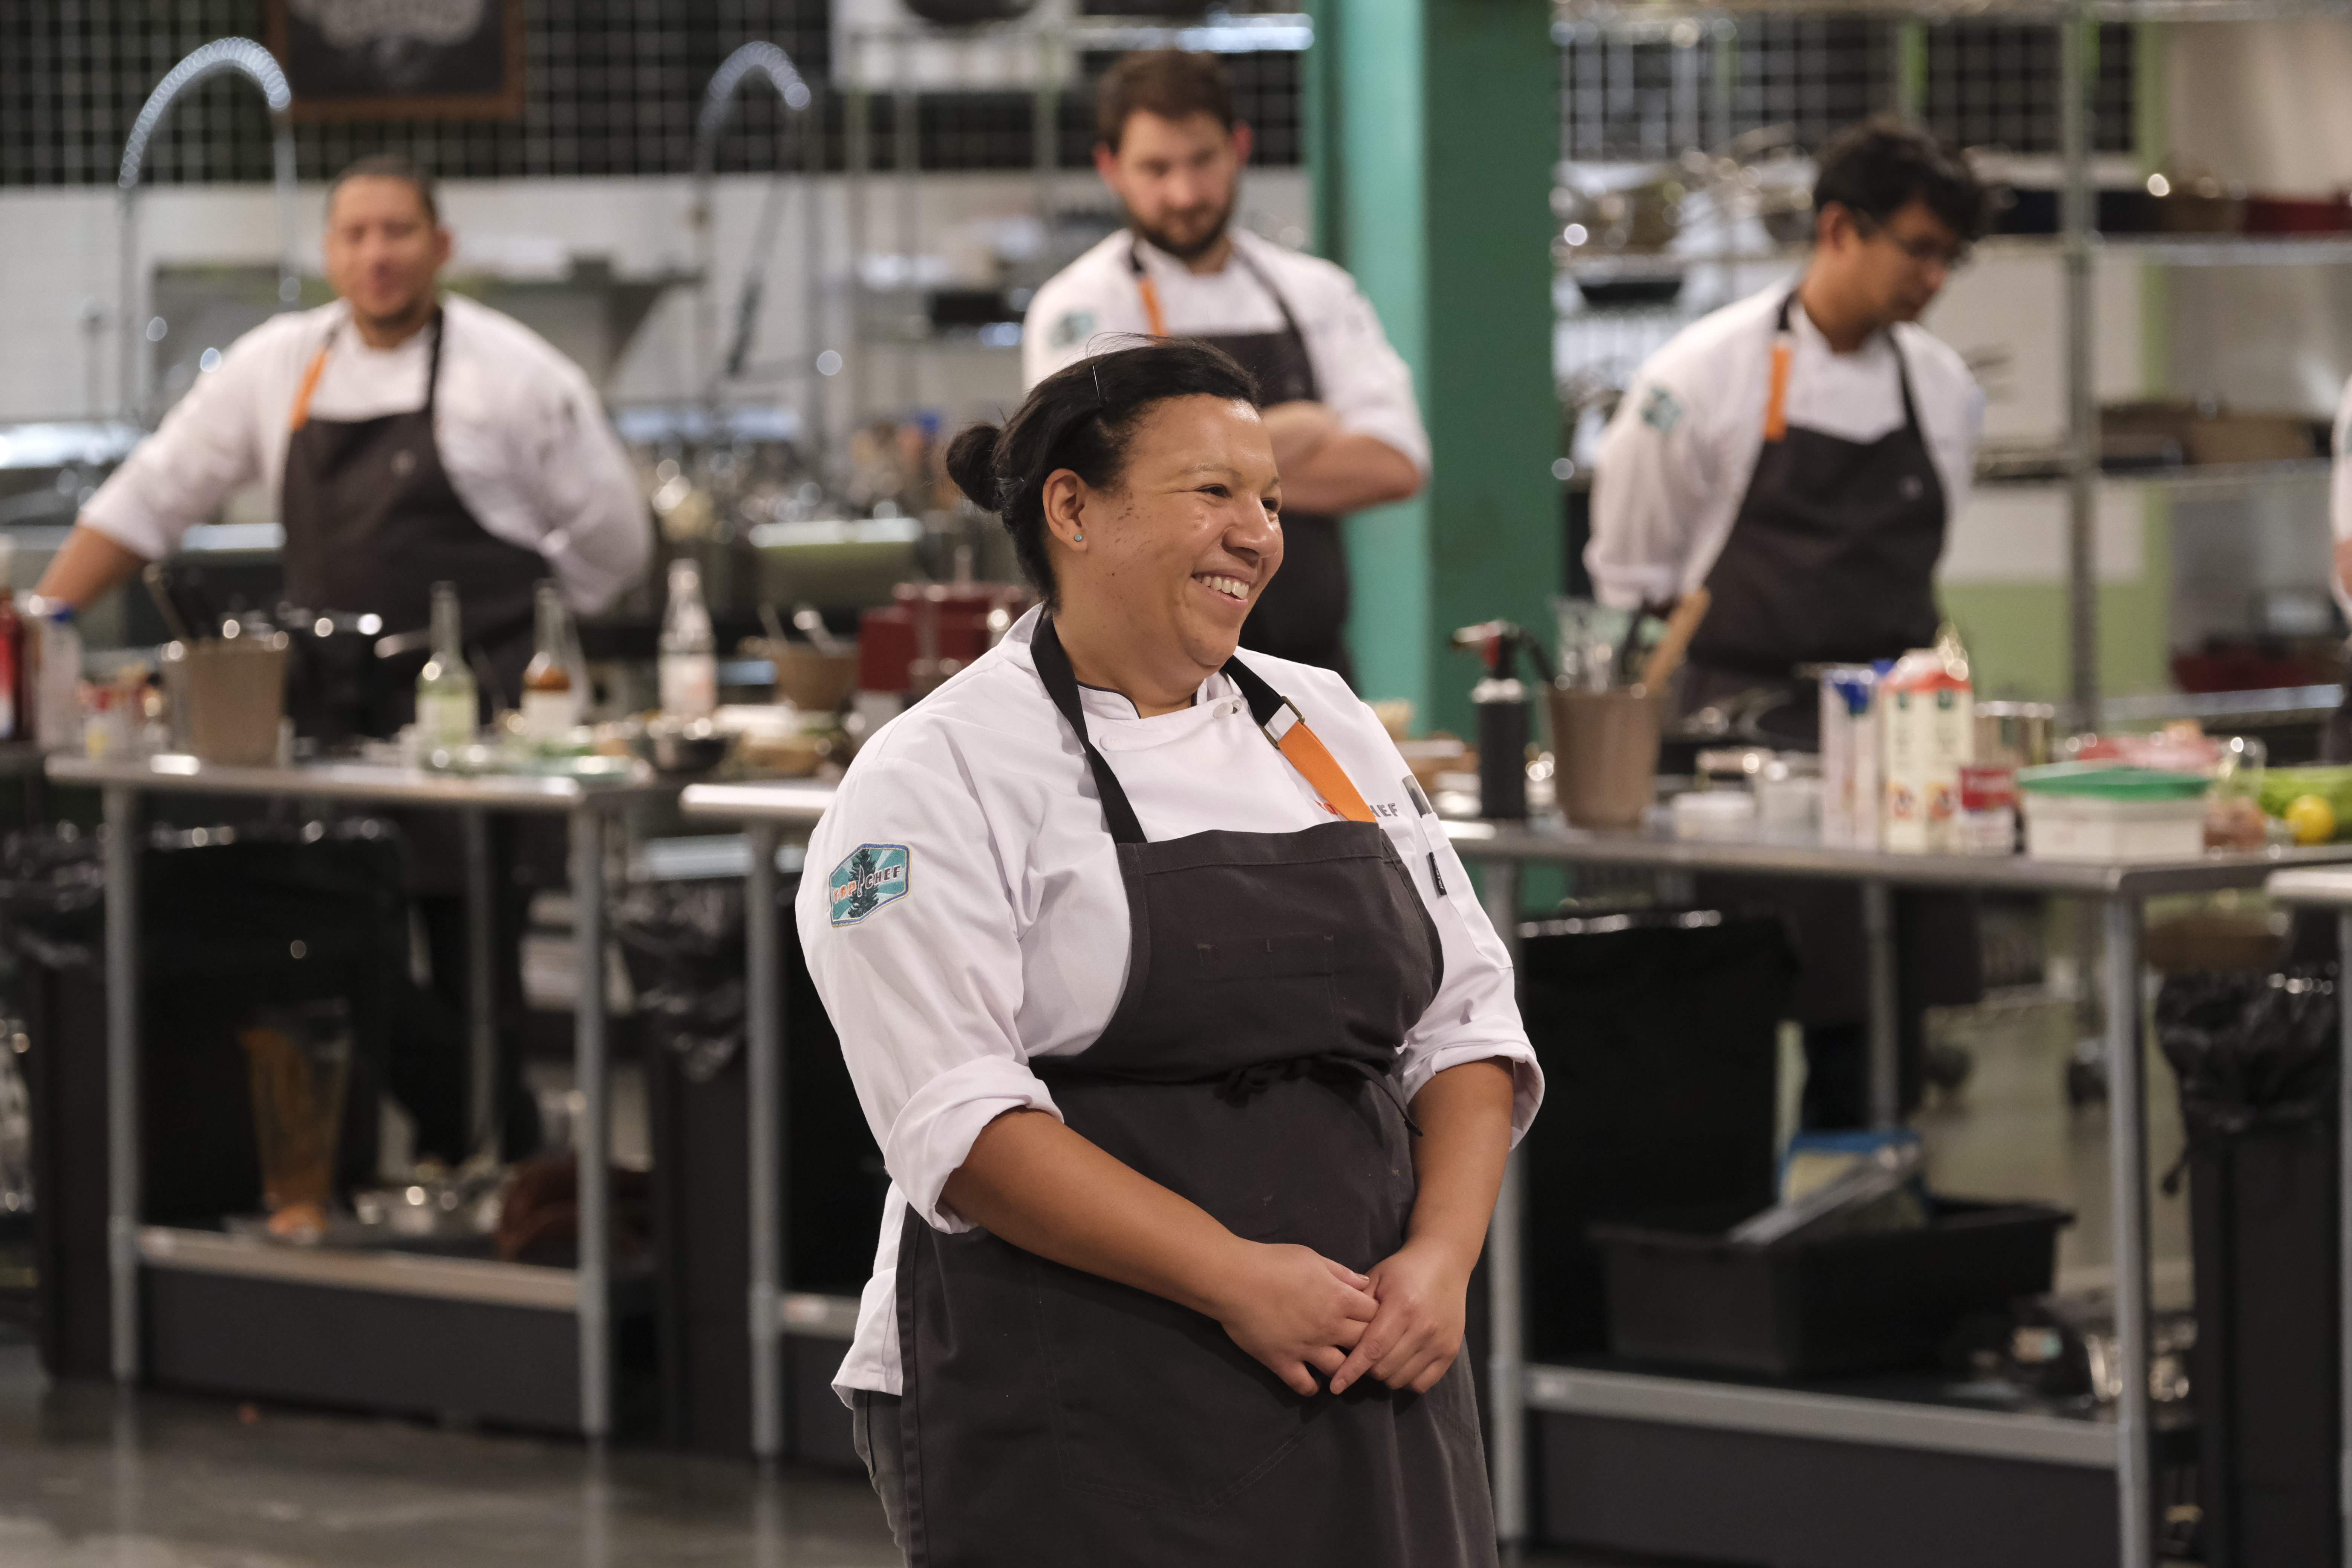 A smiling woman with an apron stands in the foreground of a large room. Three men with aprons are standing in the background.